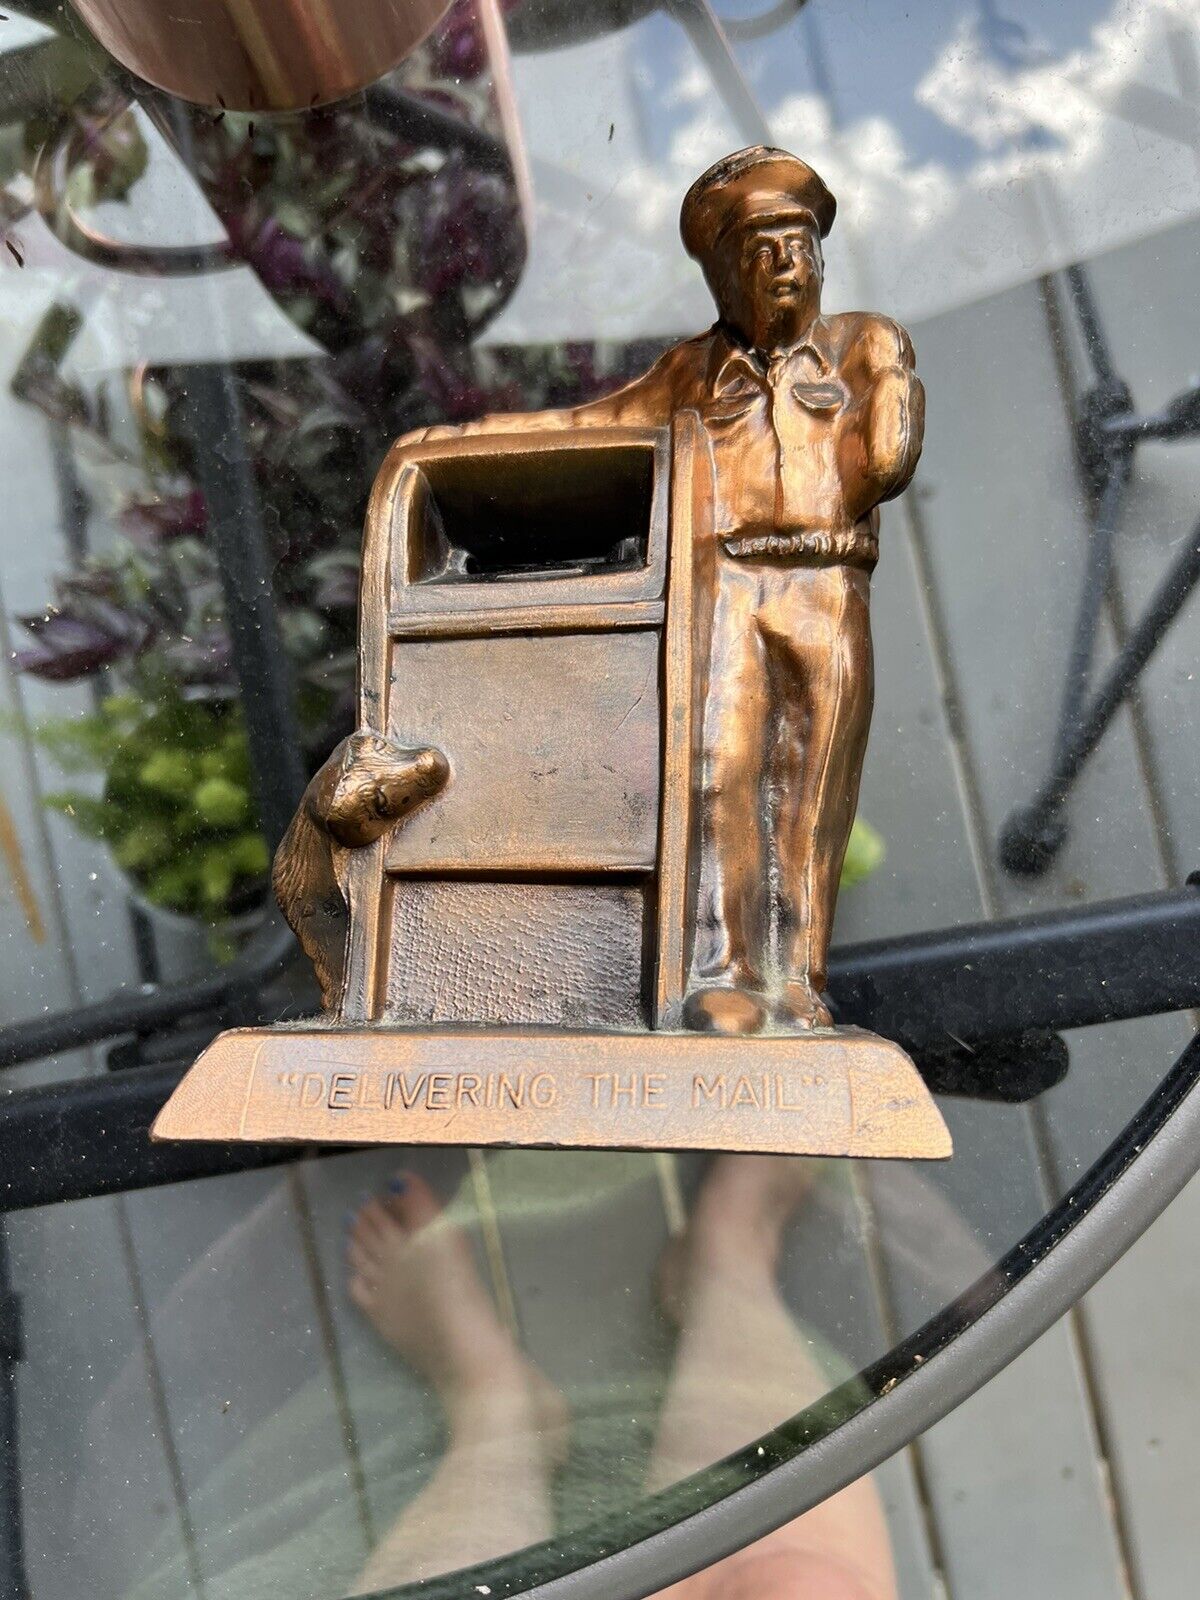 Vintage USPS Mailman Delivering The Mail Copper Tone Metal Coin Bank - USA Made